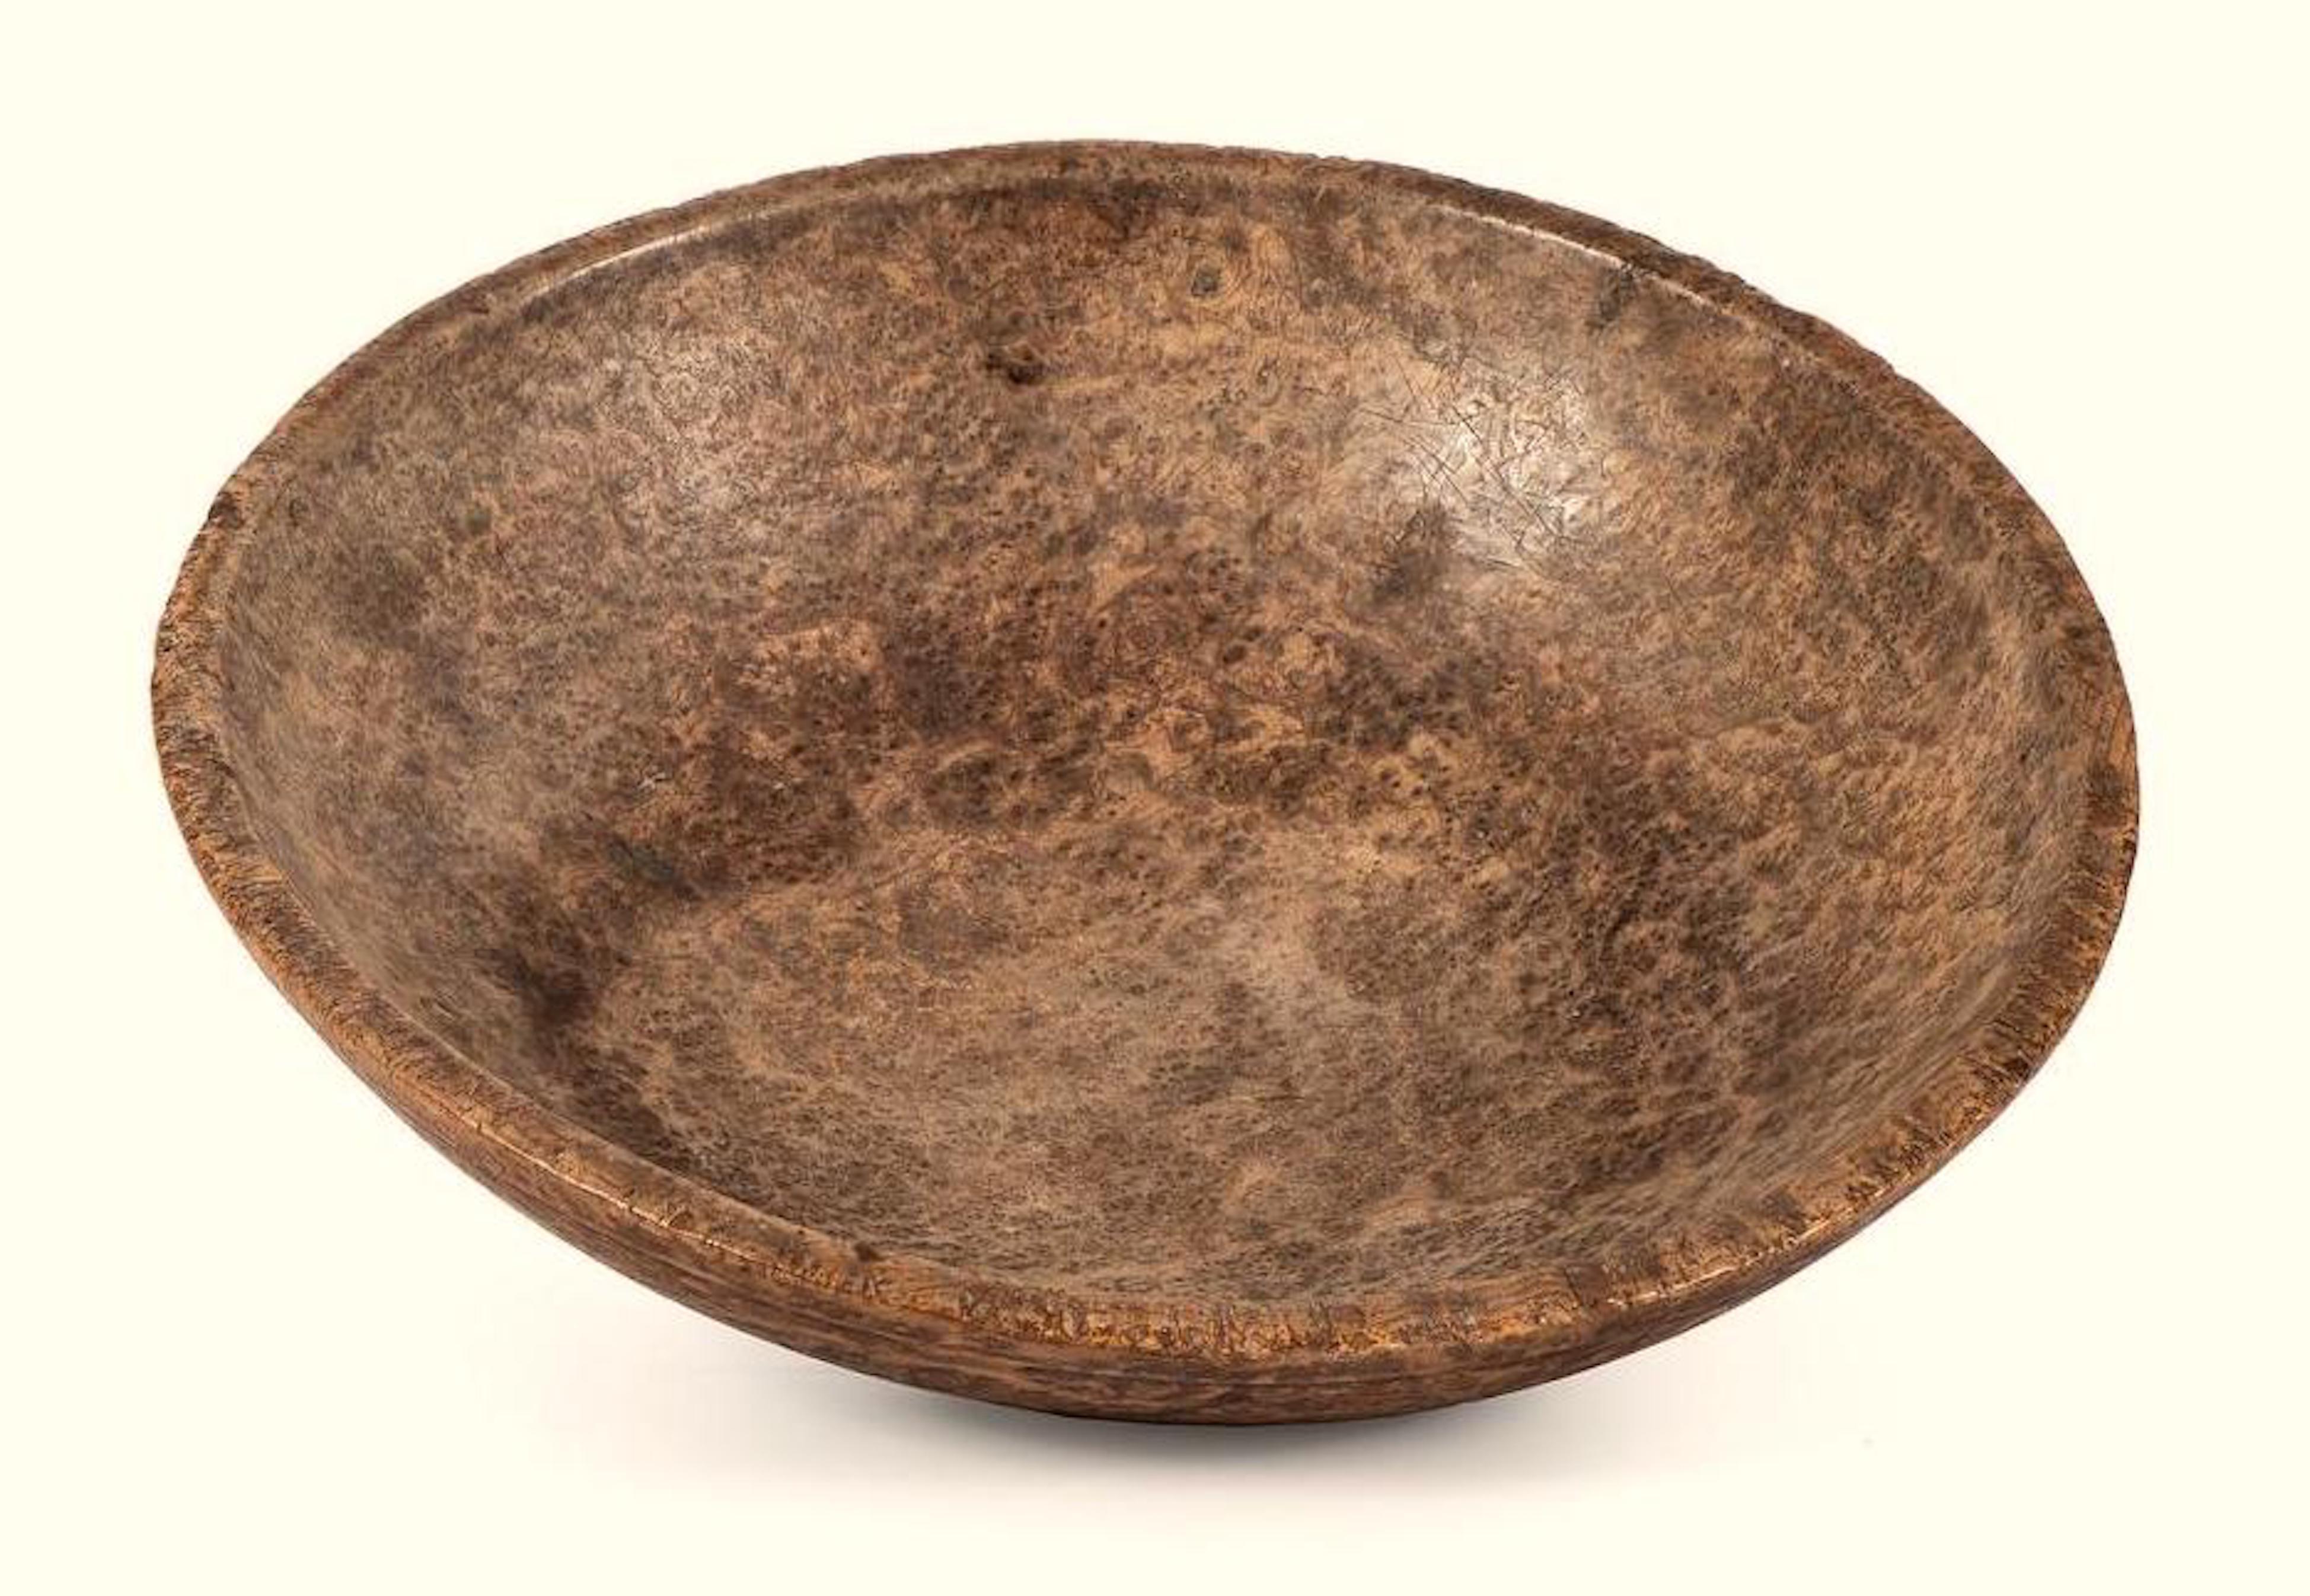 native american wooden bowls